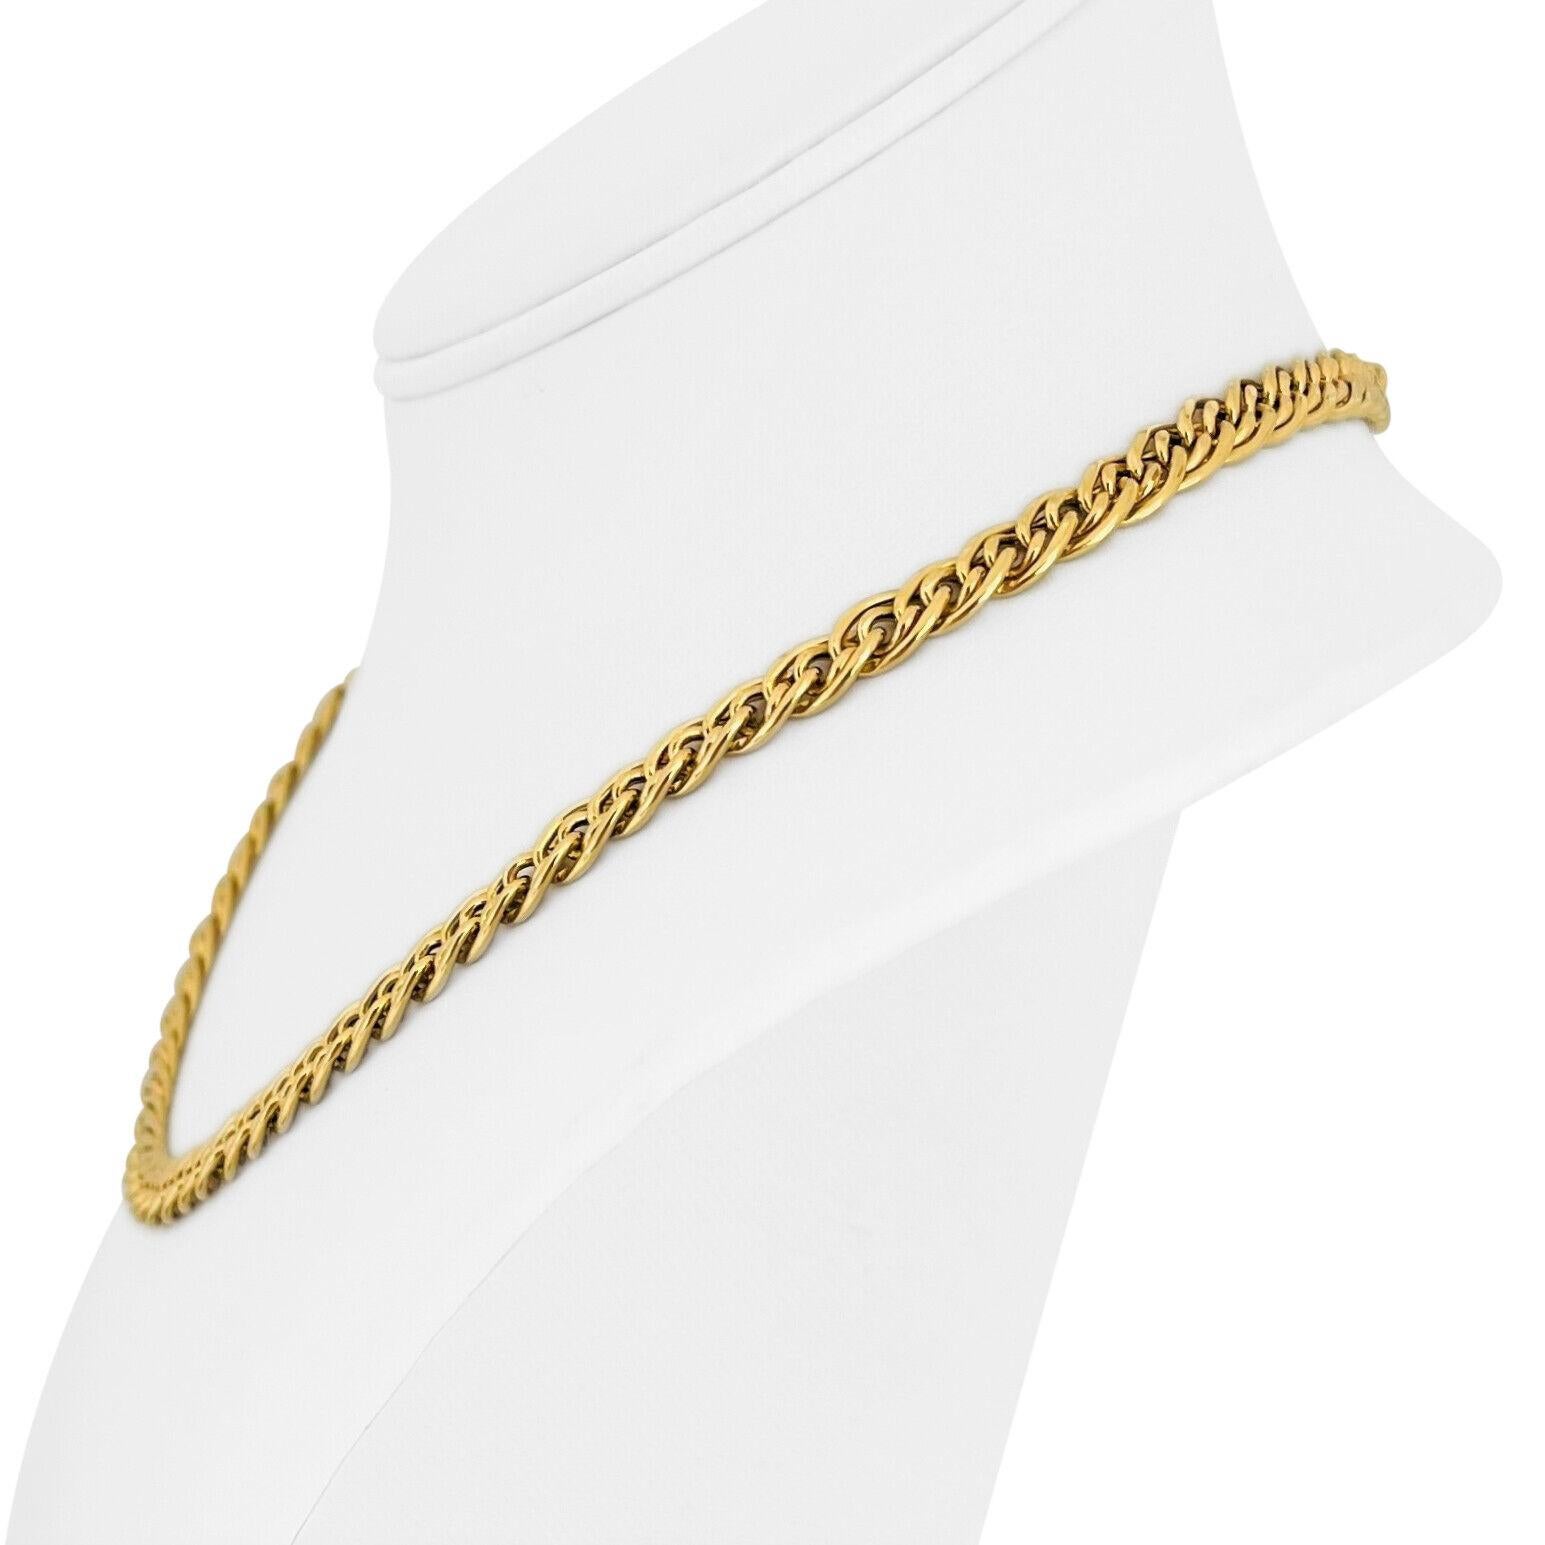 18k Yellow Gold 22.1g Ladies 6.5mm Fancy Curb Link Chain Necklace Italy 18